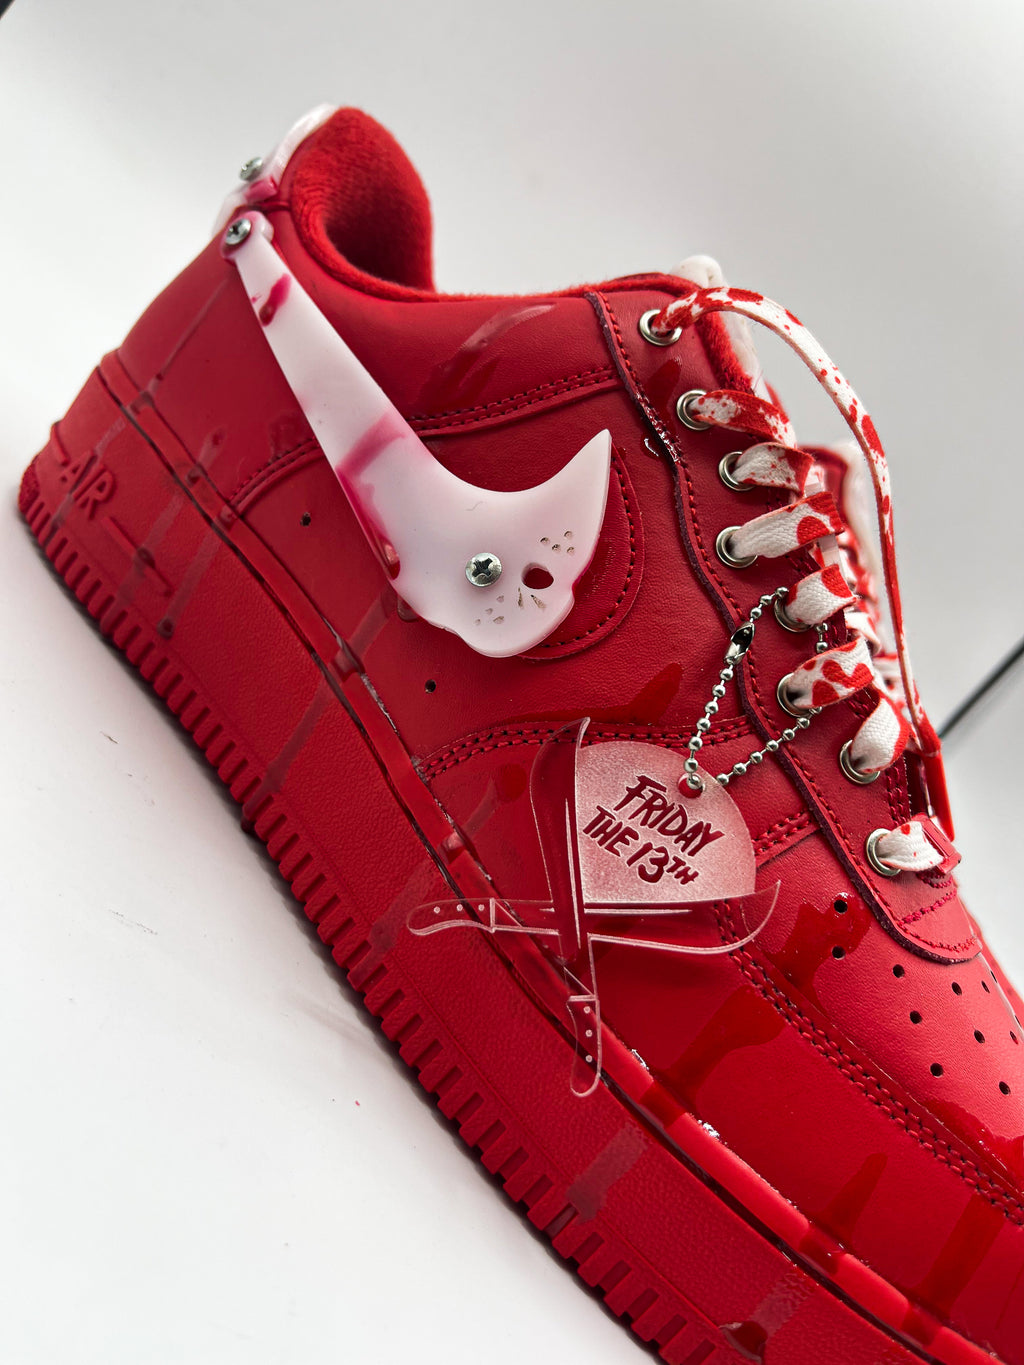 Nike Air Force 1 High Shoes Red/Red/Black Size 9.5